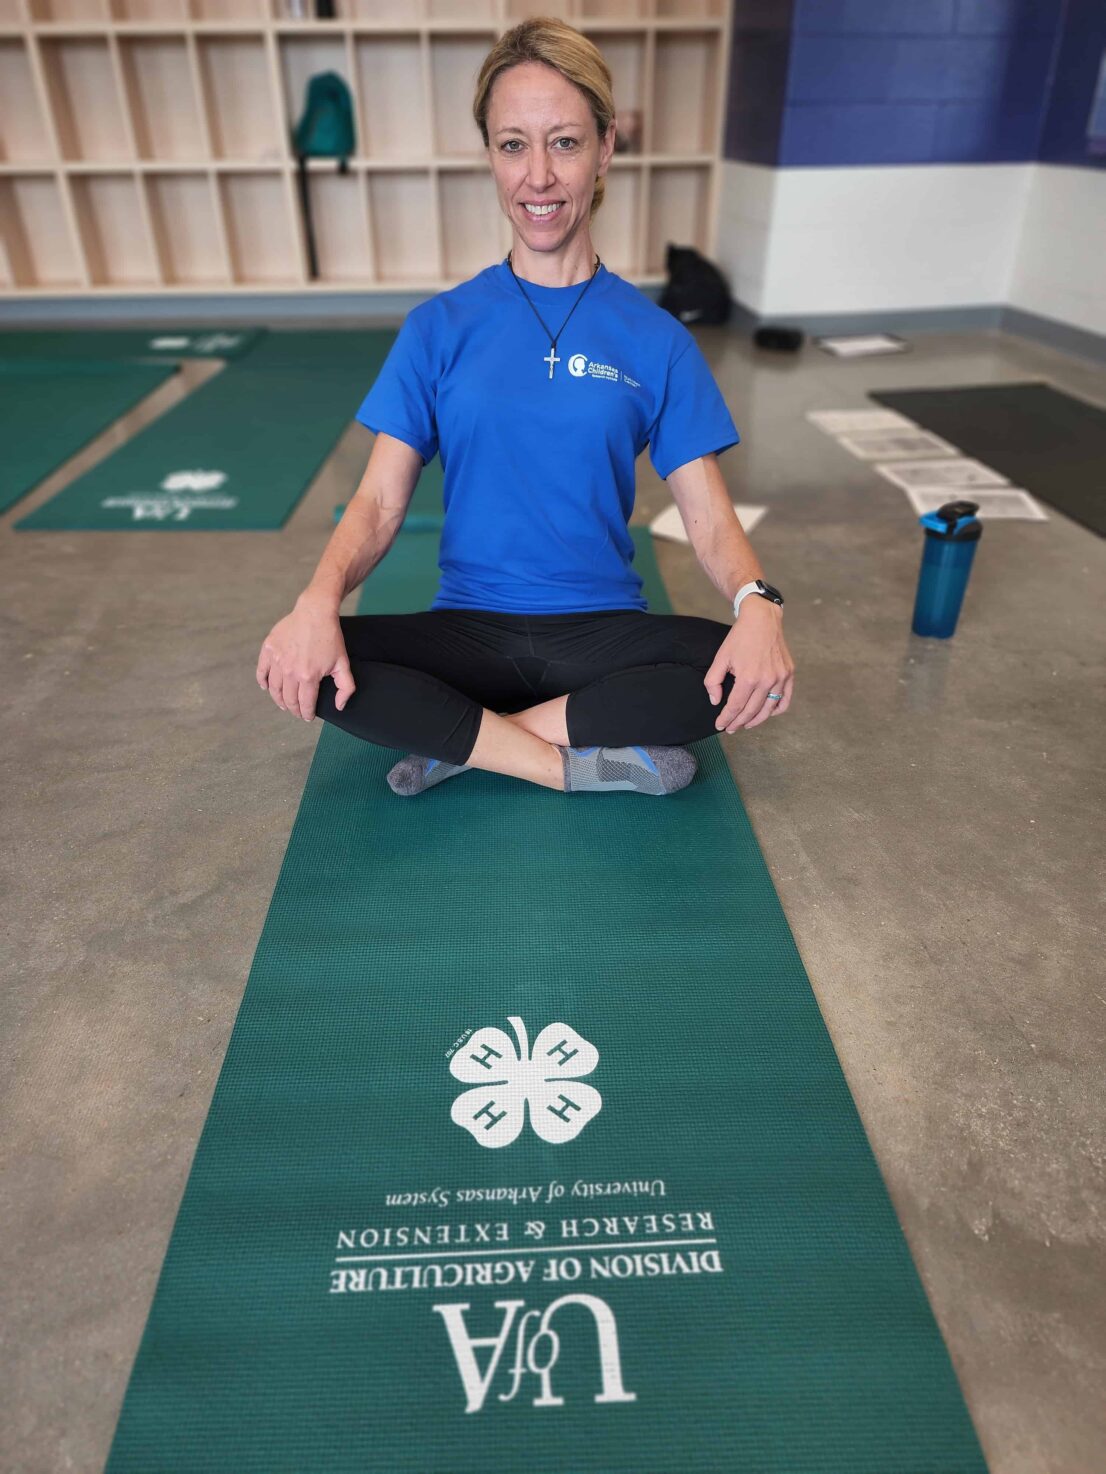 an ACNC employee sits upright on a green yoga mat, she has blonde hair and is smiling